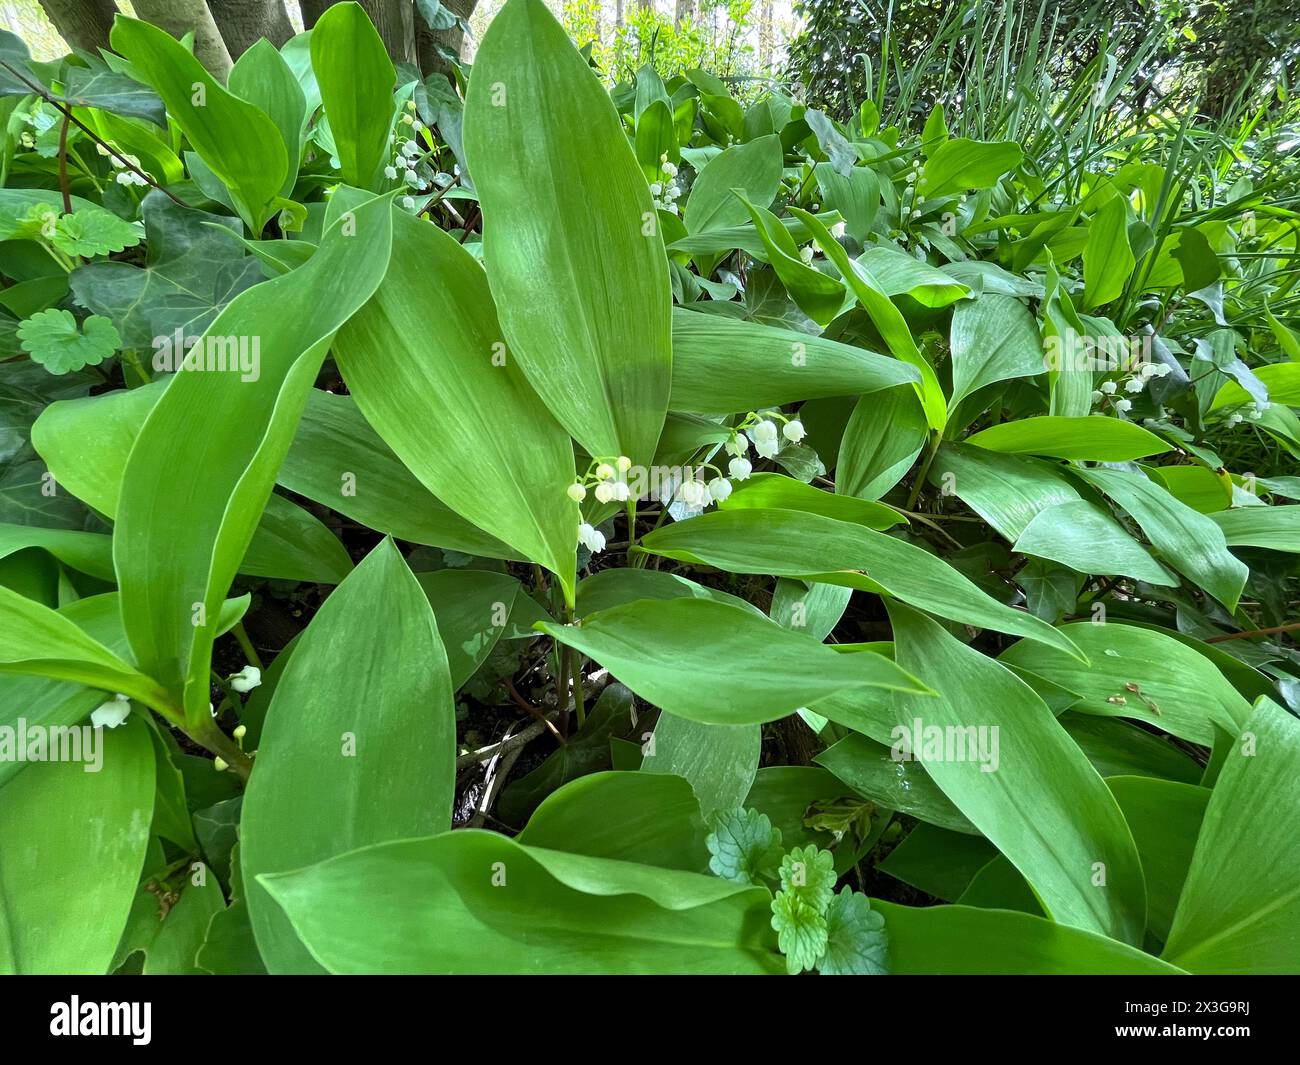 Lily of the valley blooming flowers in woods, natural environment of rare white flower, selective focus, beautiful garden or wild flowers among green leaves Stock Photo